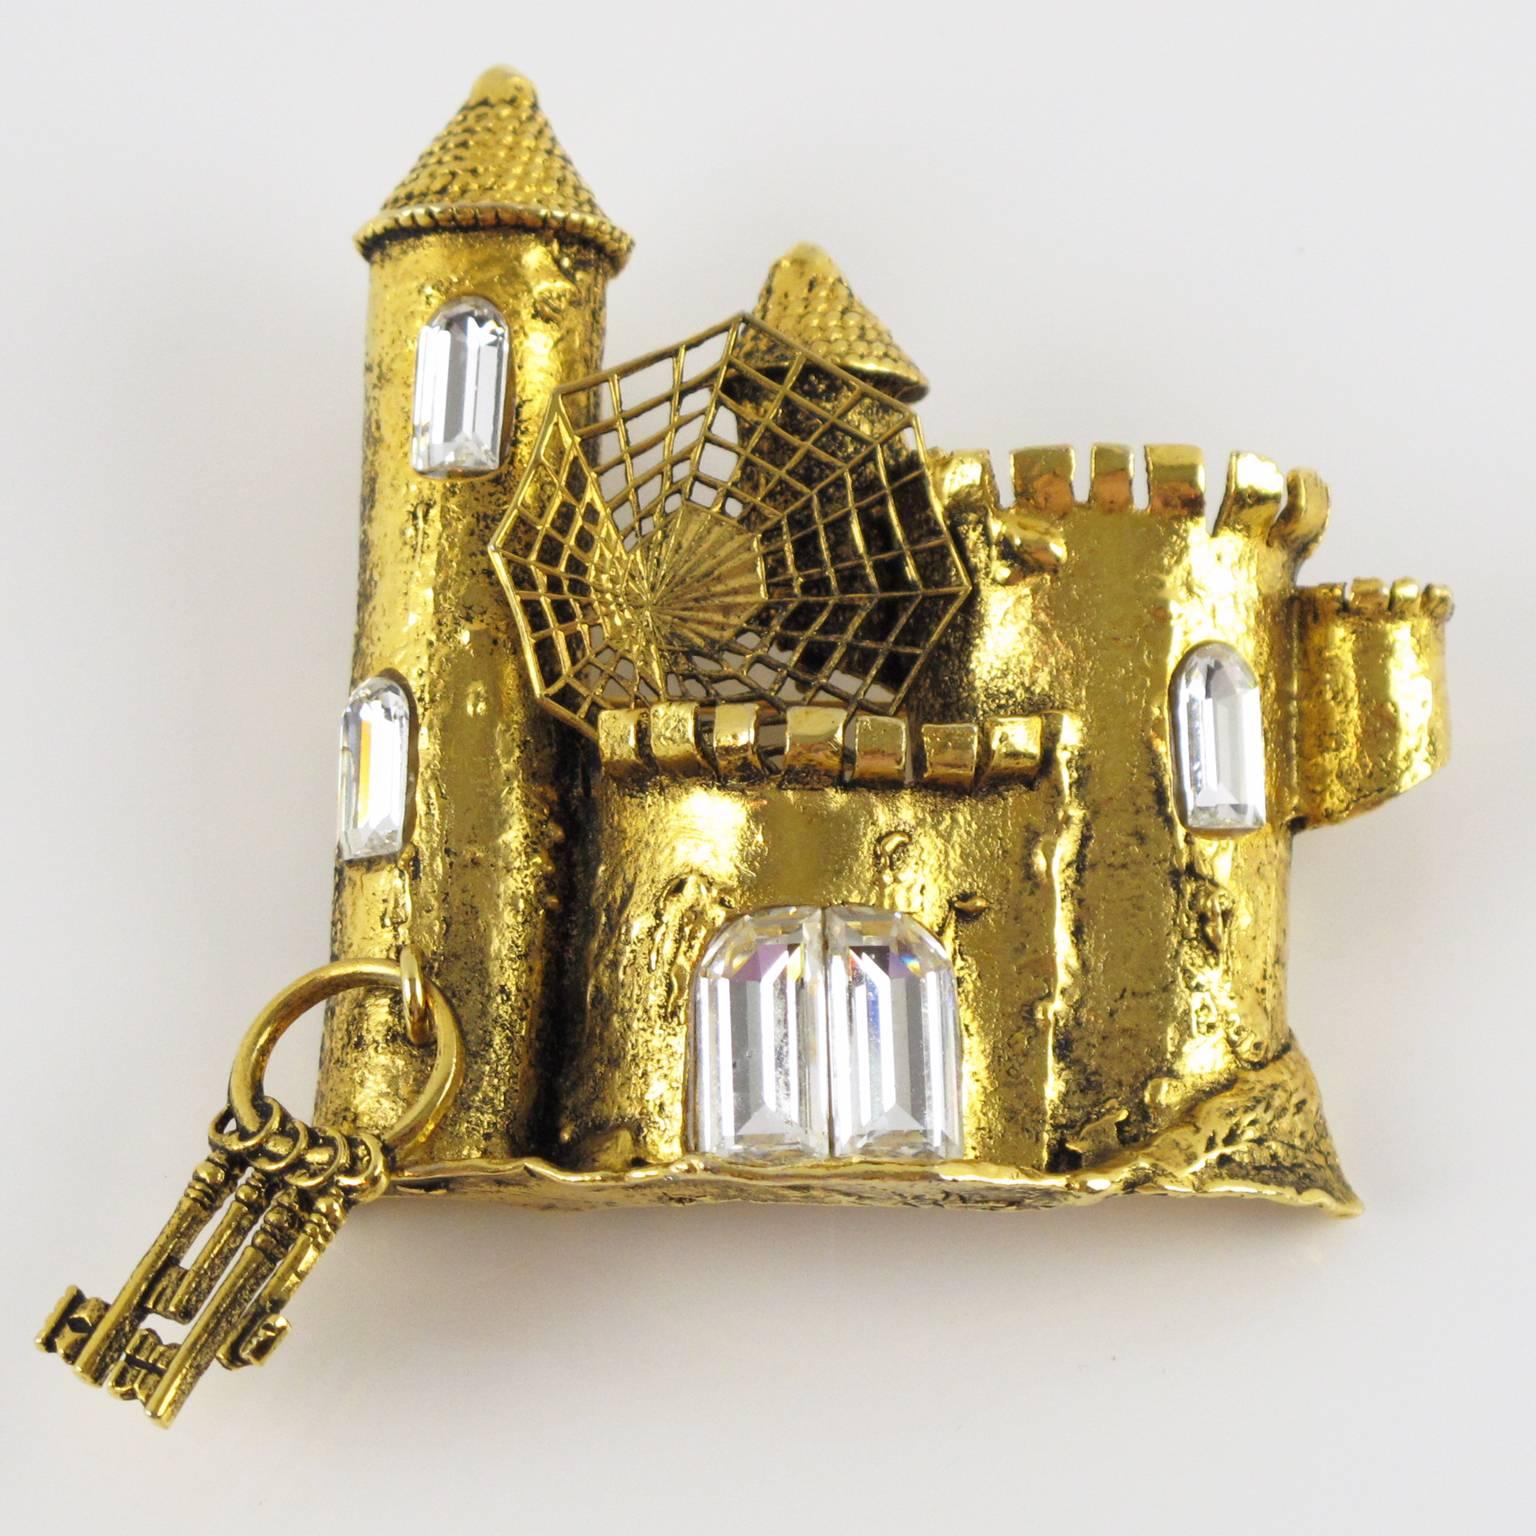 Vintage signed MERCEDES ROBIROSA Paris couture Pin Brooch. Fabulous fantasy style with gilt metal all textured and pierced, figuring an haunted castle with spider web and dangling charm set of keys, ornate with large square shaped clear rhinestones.